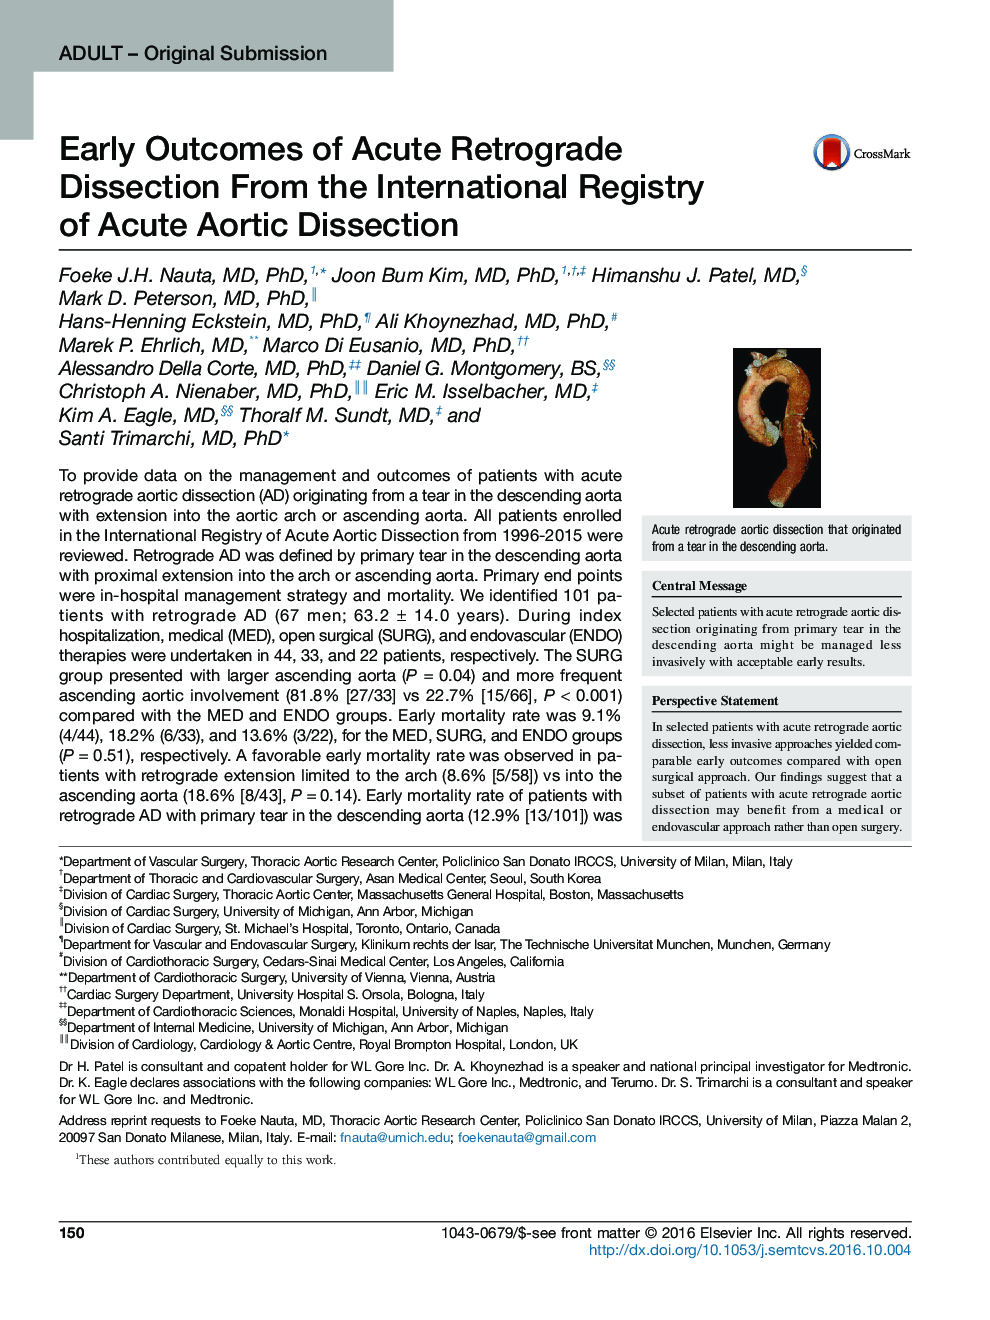 Adult - Original SubmissionEarly Outcomes of Acute Retrograde Dissection From the International Registry of Acute Aortic Dissection